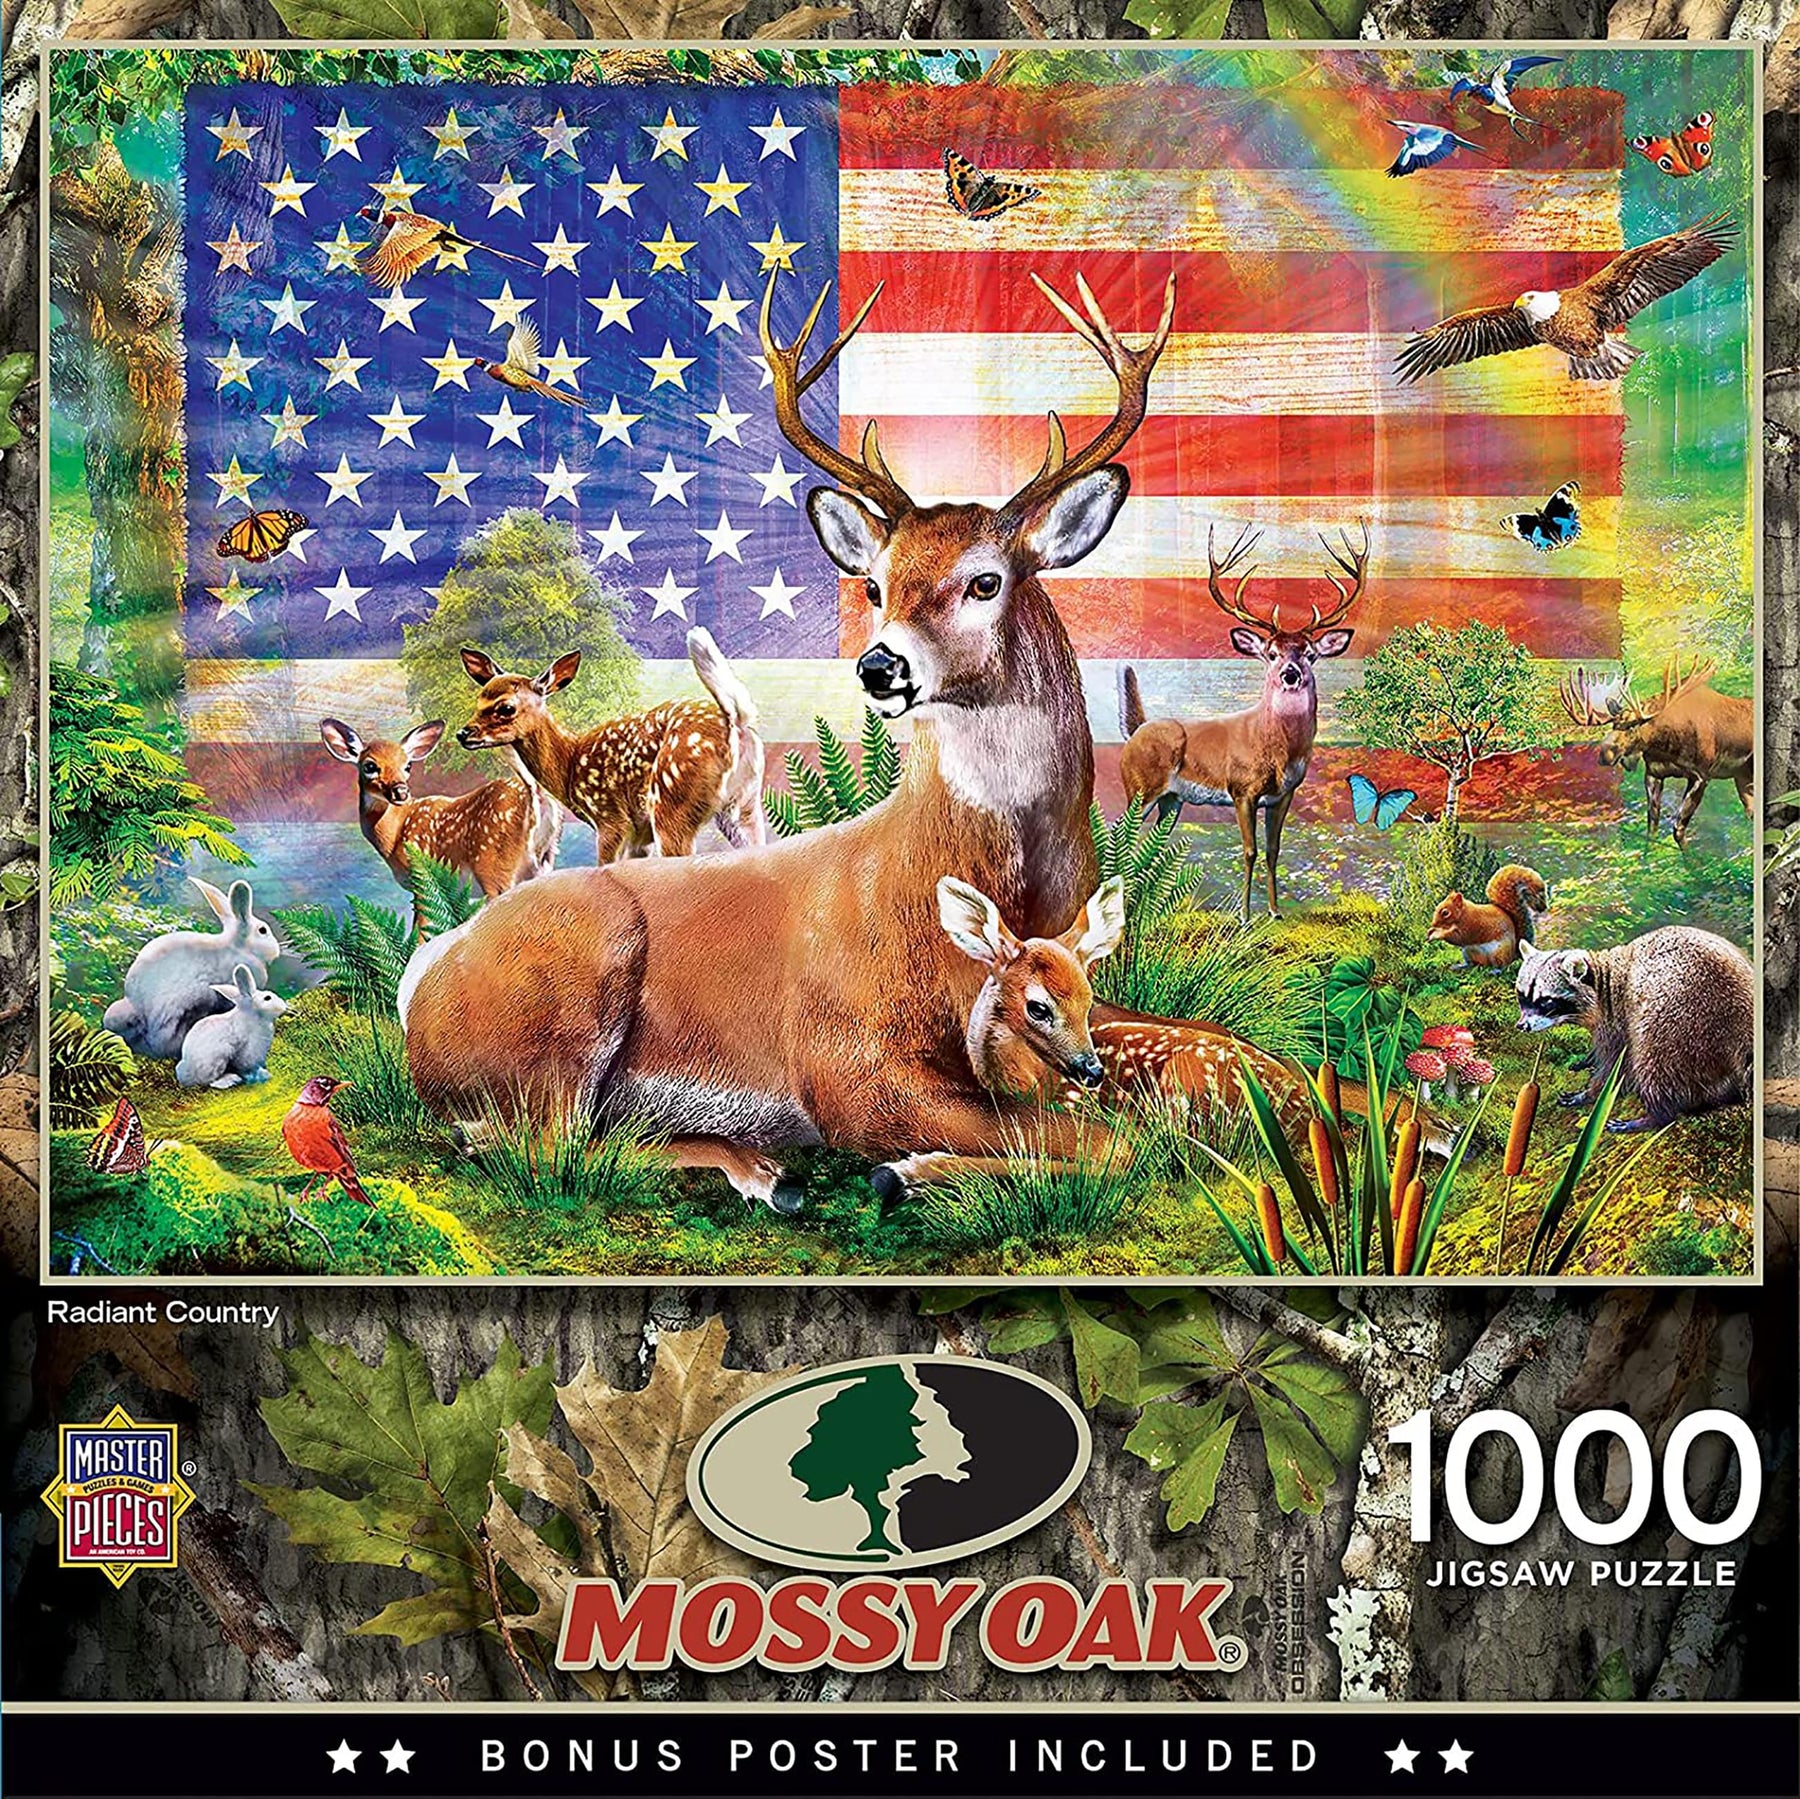 Radiant Country 1000 Piece Jigsaw Puzzle